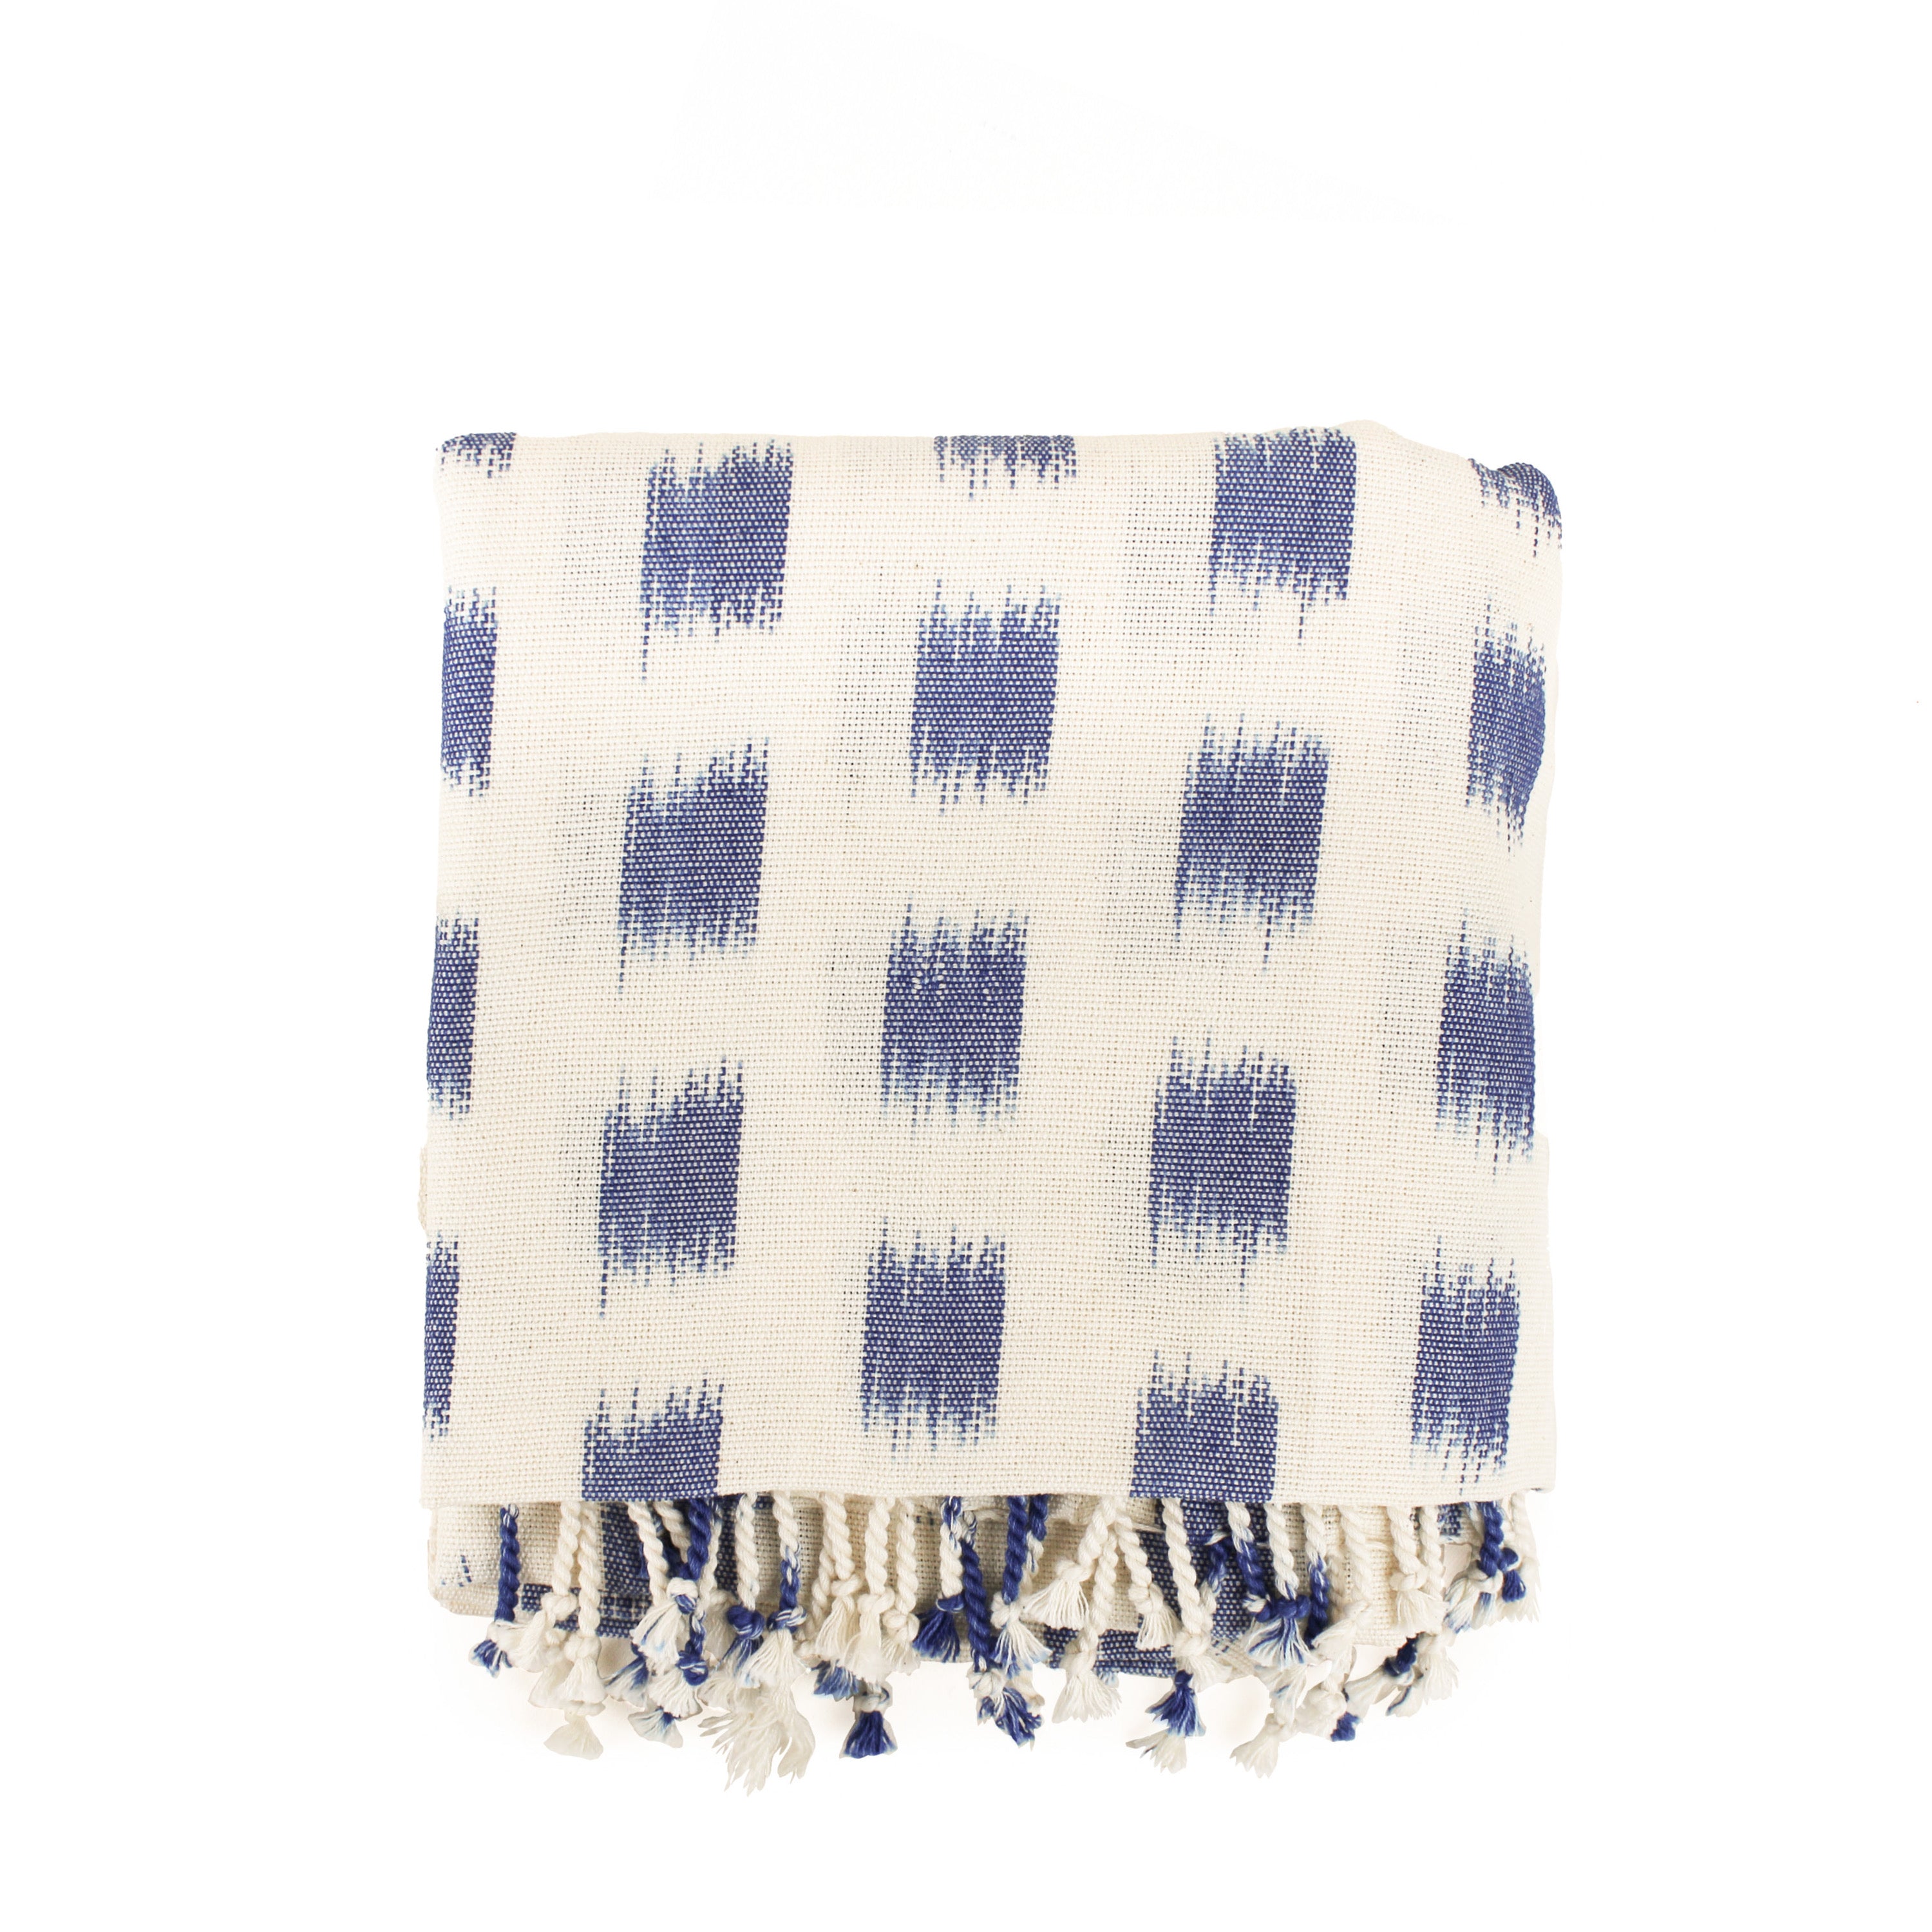 Hand woven artisan Bartola Beach Blanket in Brushstrokes pattern. The blanket is folded, showing flame stitched blue squares and fringe on the edges.